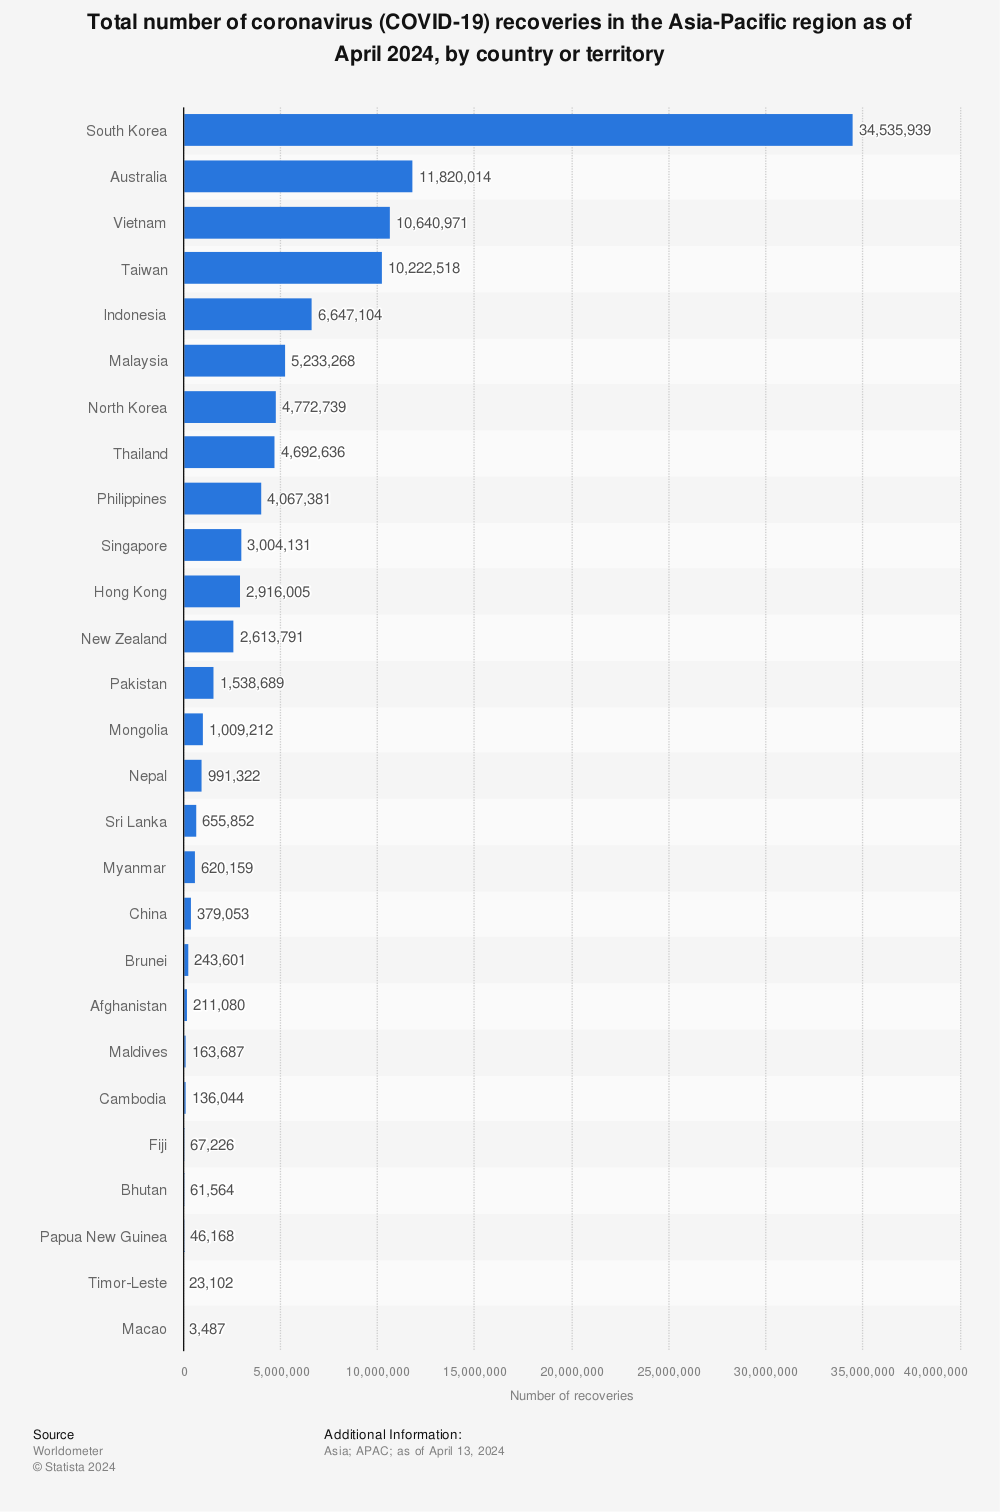 Statistic: Number of coronavirus (COVID-19) recoveries in the Asia-Pacific region as of January 19, 2022, by country | Statista